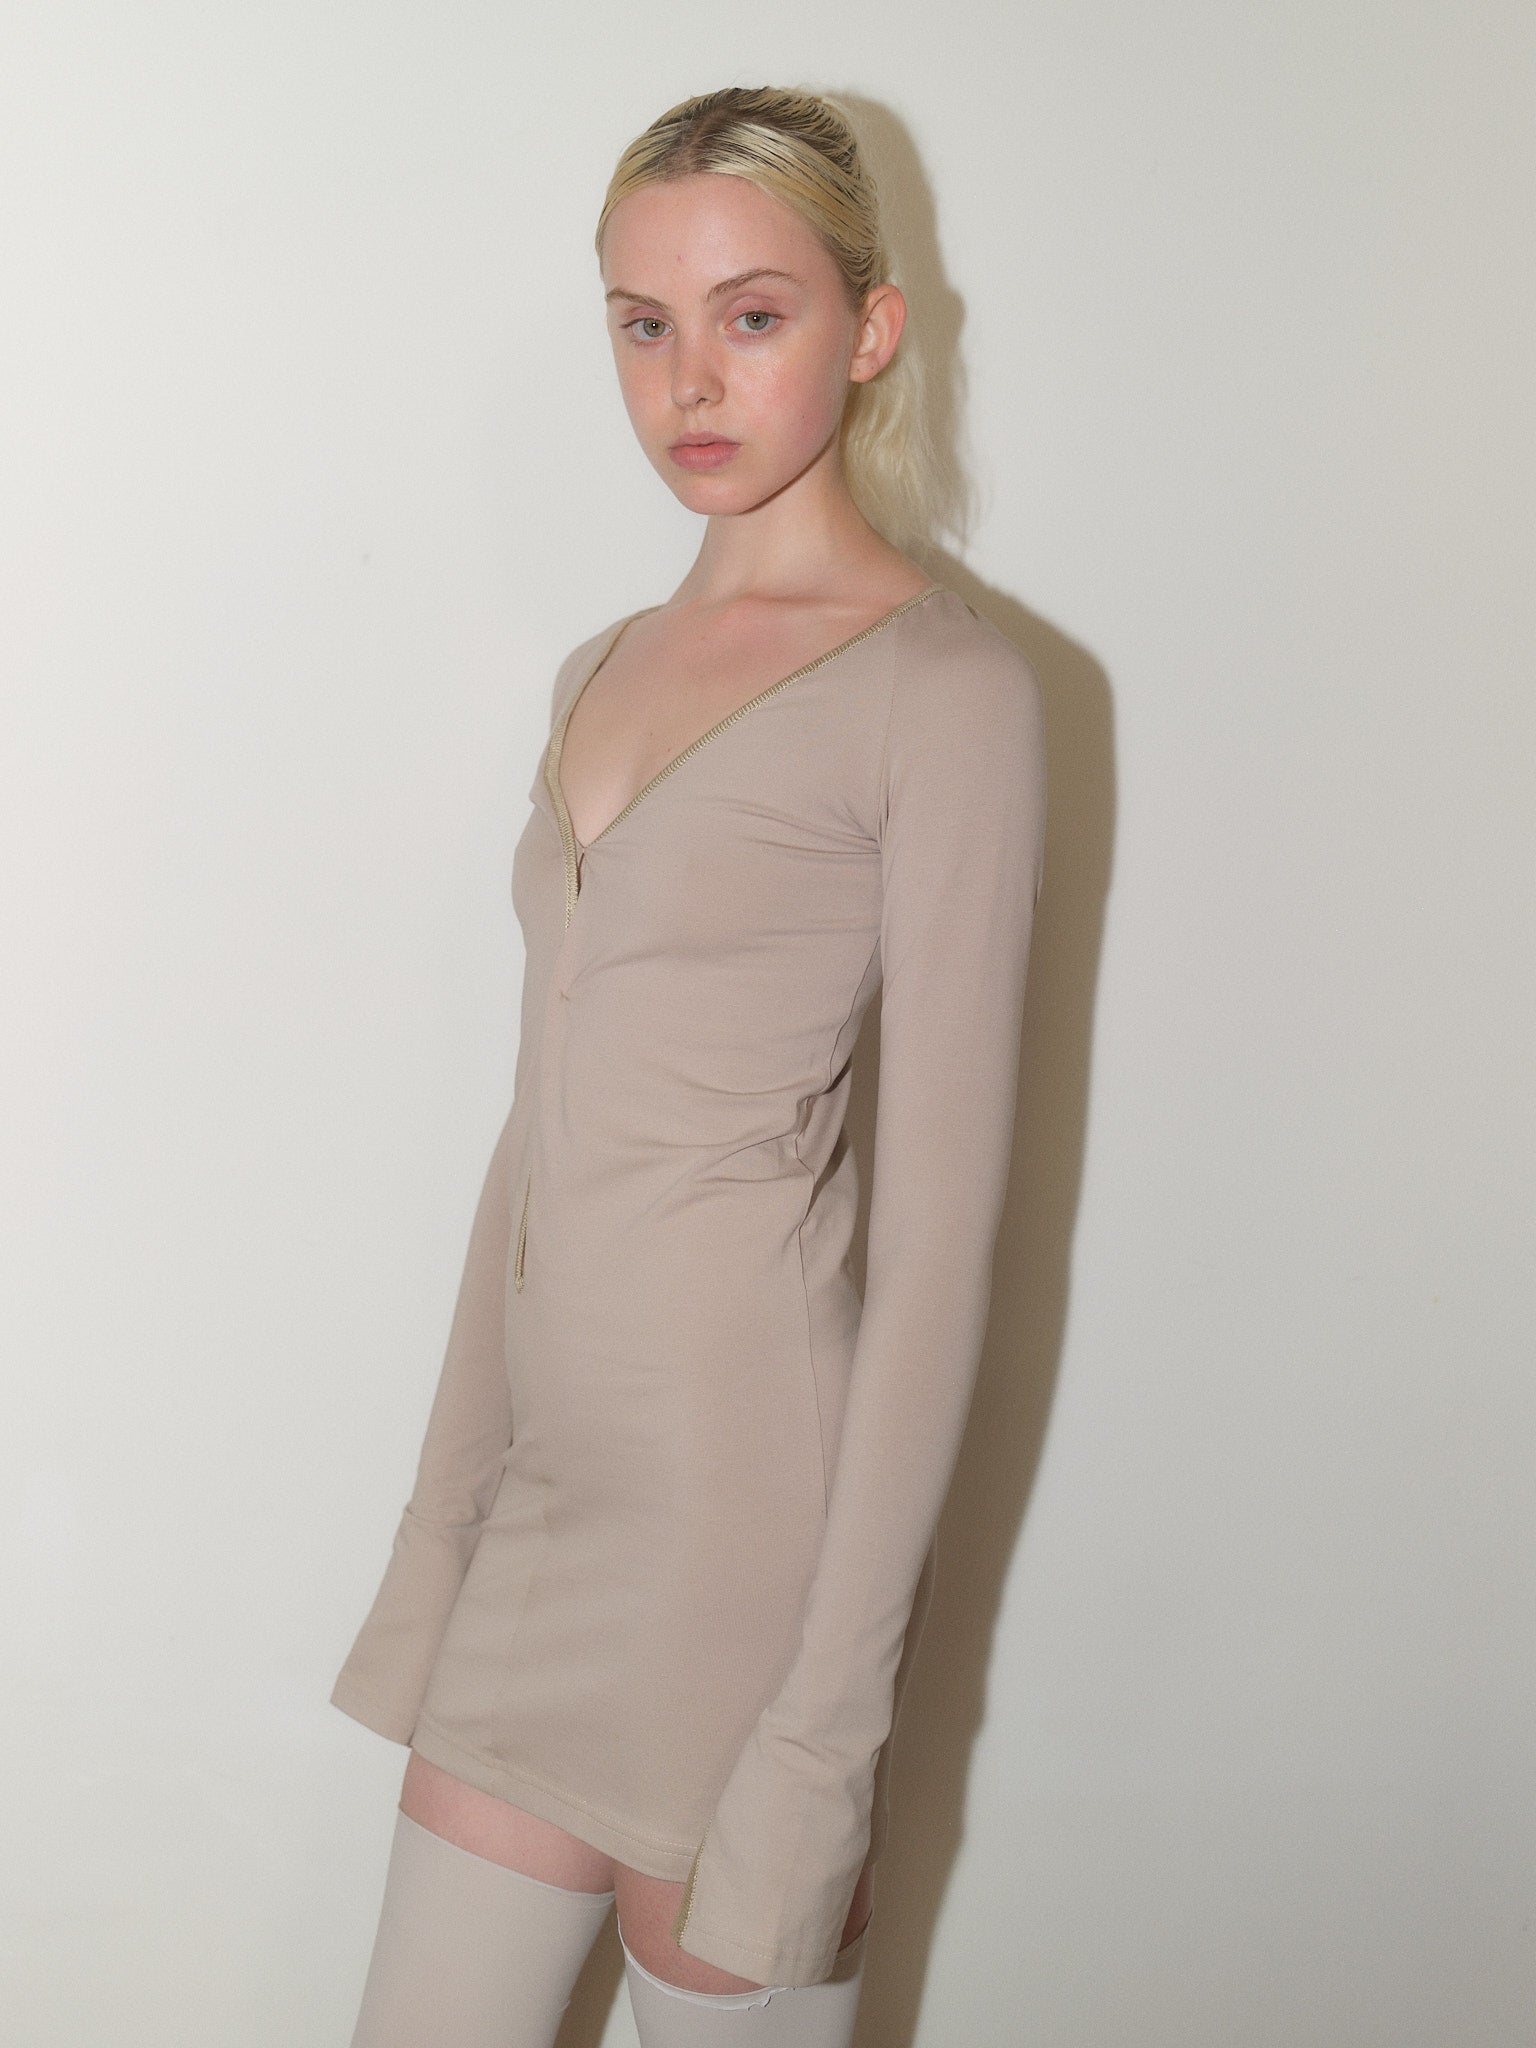 Cotton Jersey Dress designed by Christina Seewald. Sustainable, designed and made in Europe.